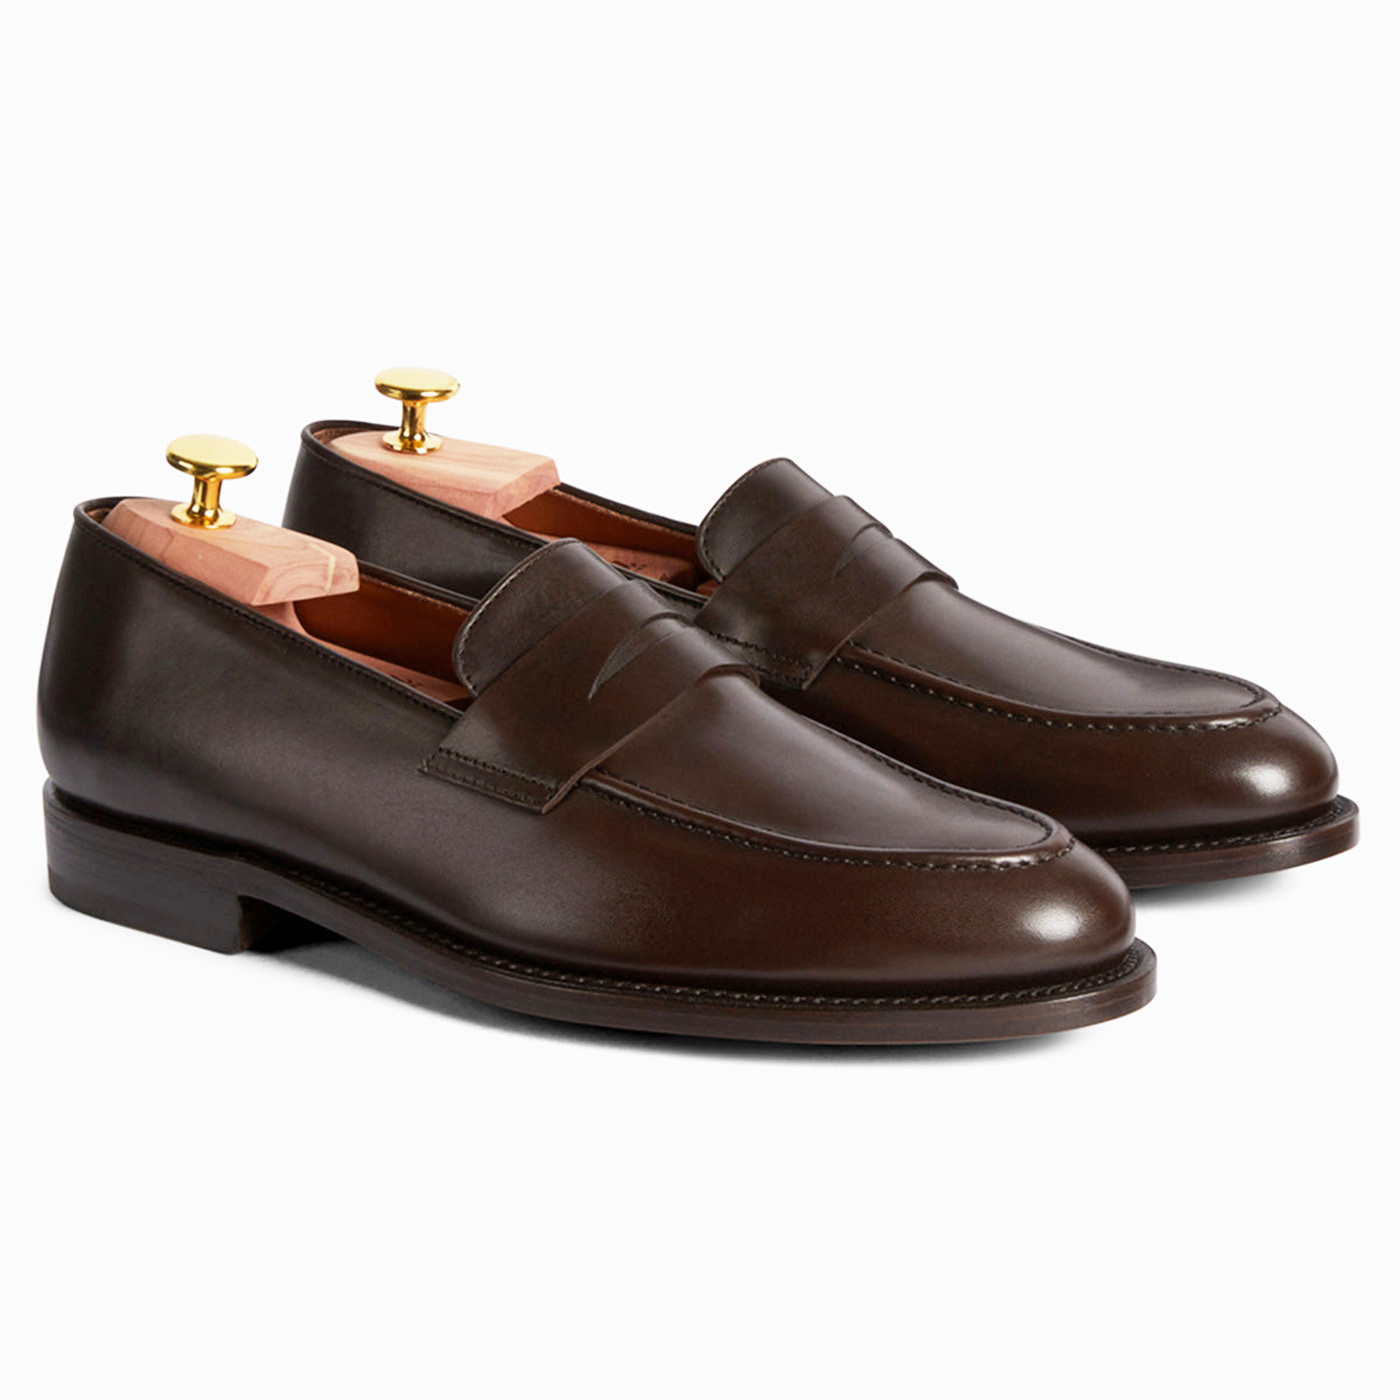 penny loafers (5)